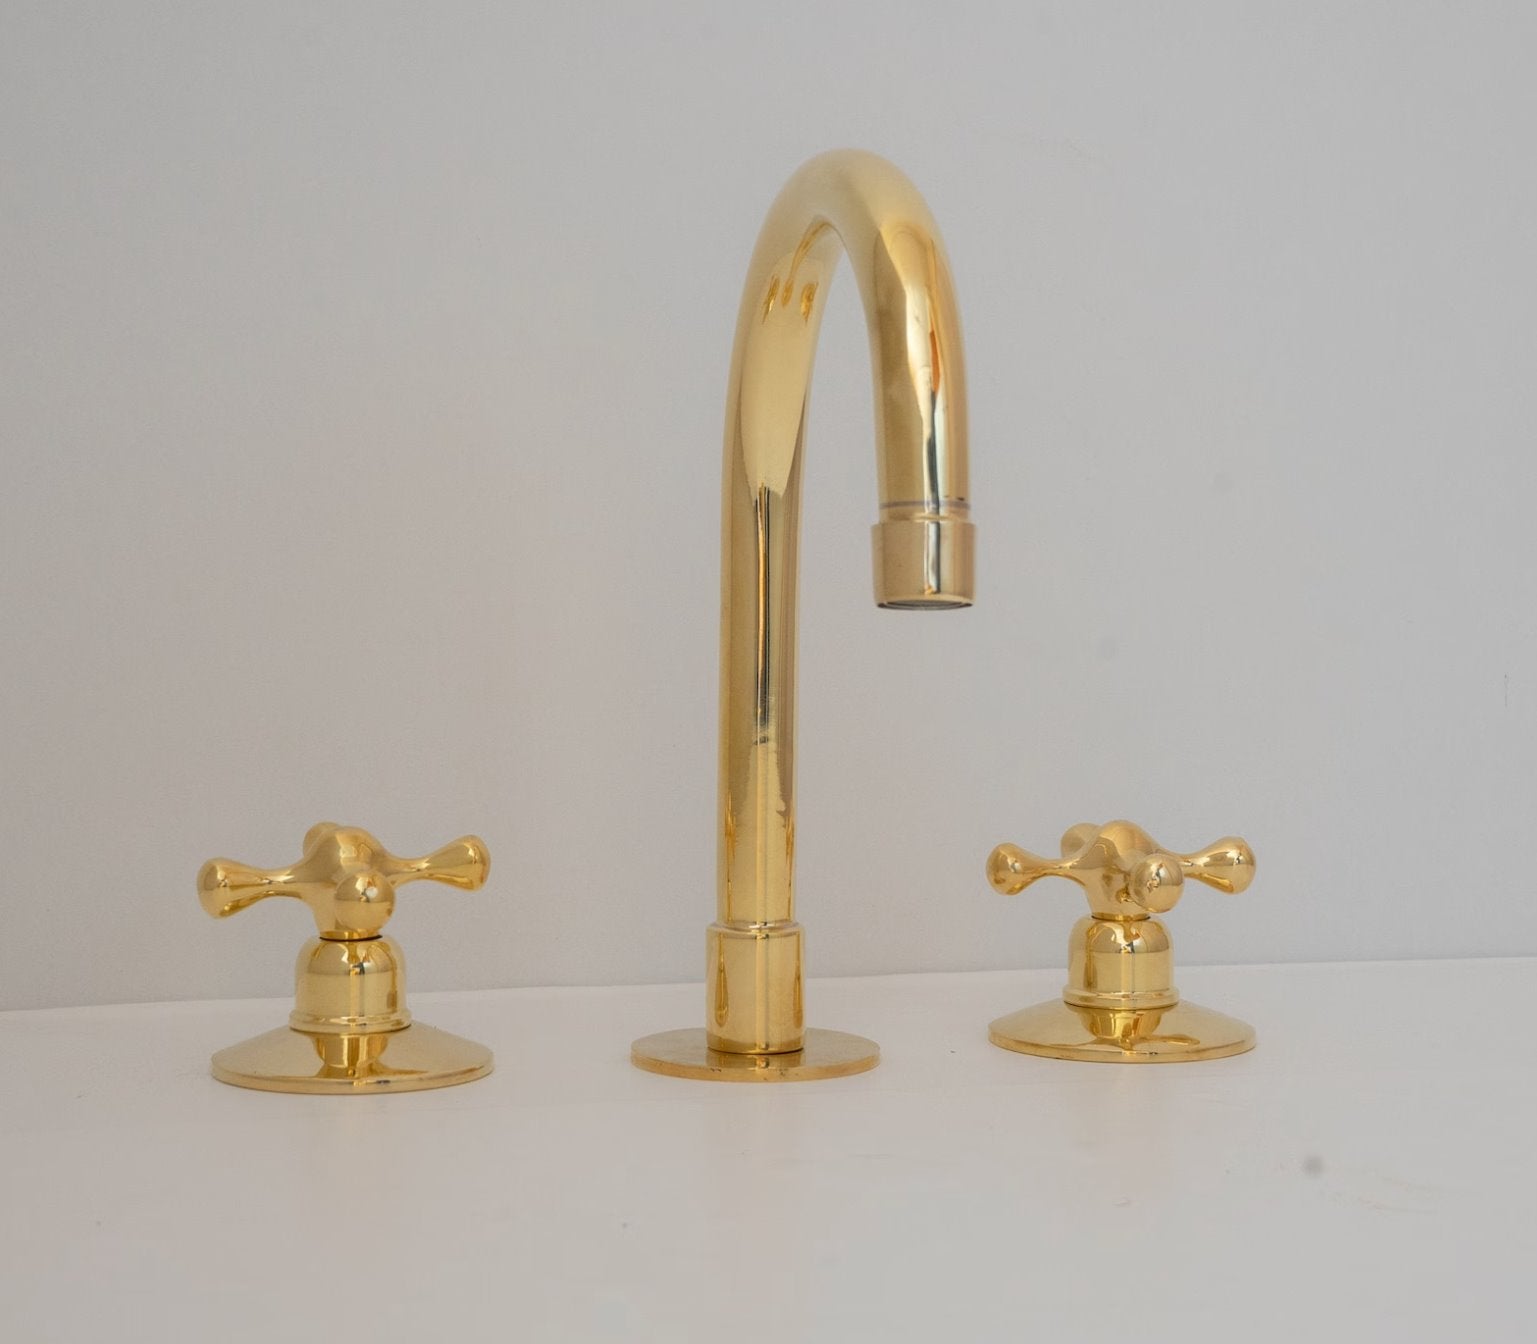 Widespread 3 Holes Solid Unlacquered Brass Faucet, Vanity Sink Faucet, Antique Brass Bathroom Faucet